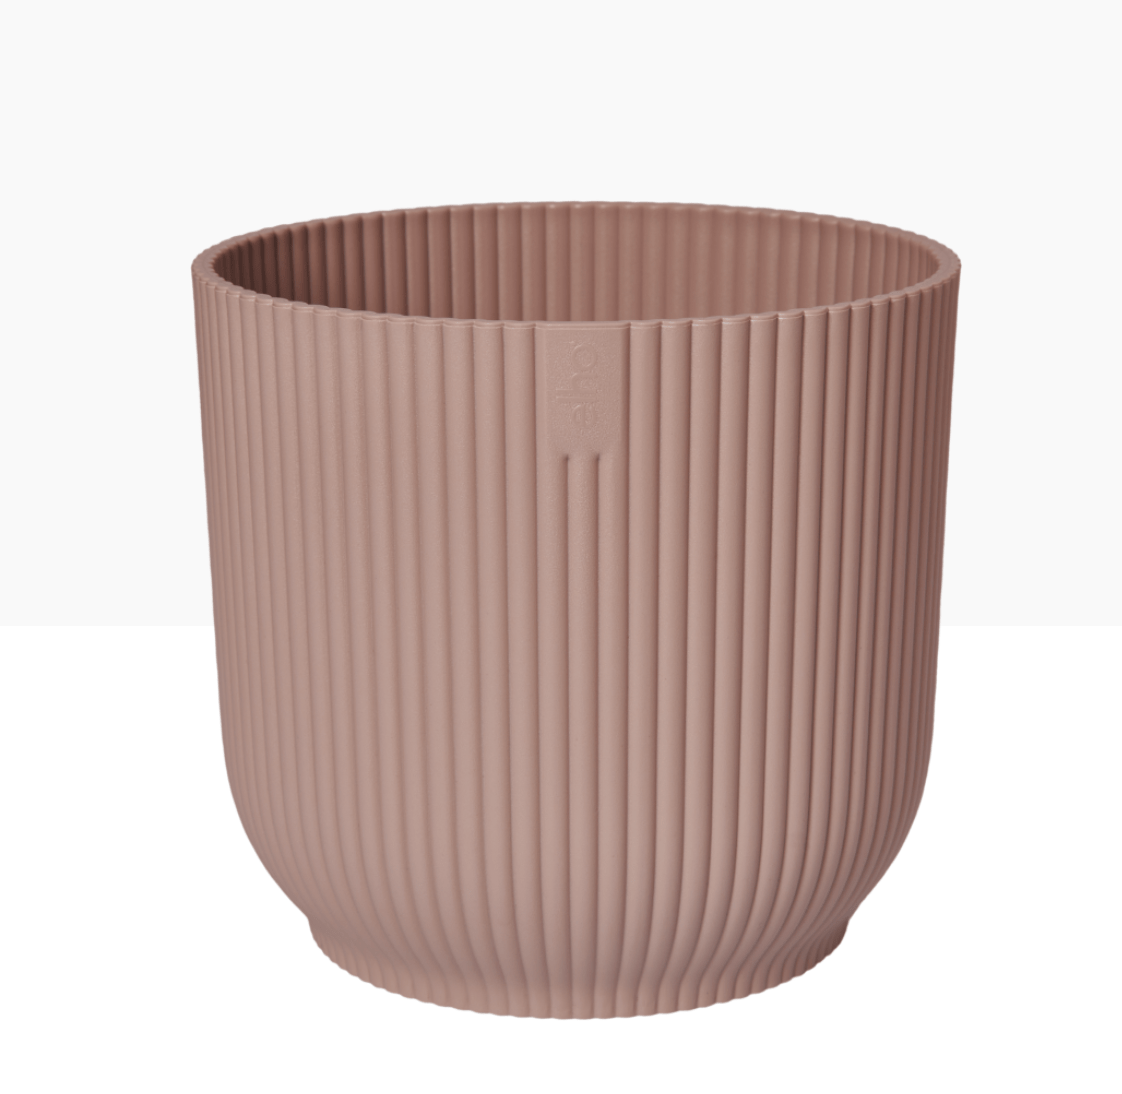 Elho Plant Pots 14 / Delicate Pink Recycled Plastic Plant Pot - 'Vibes Fold' in Delicate Pink